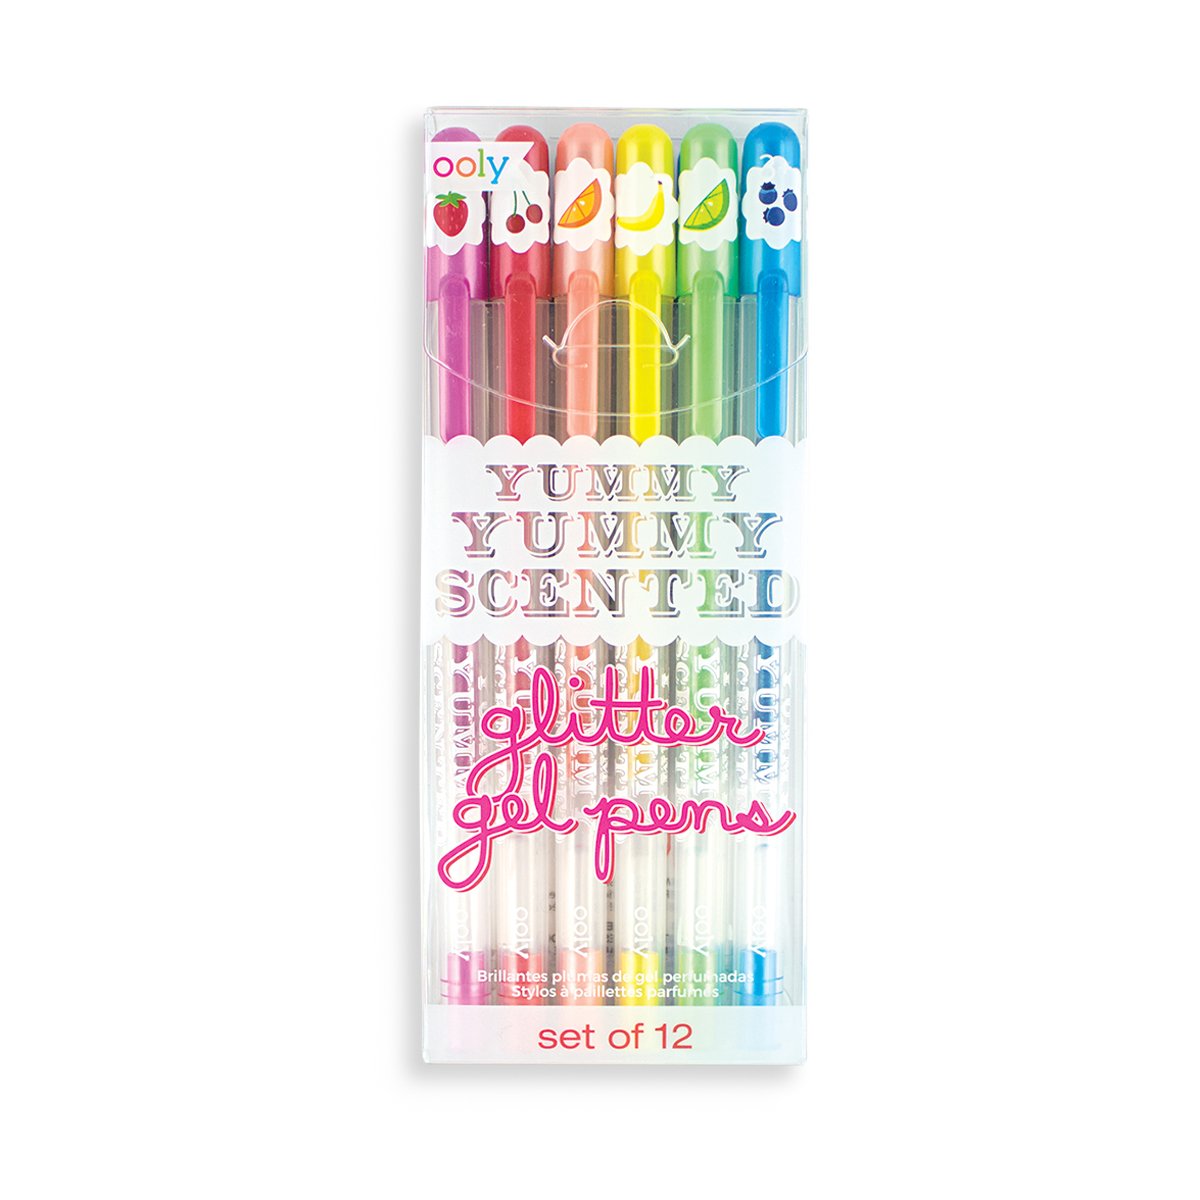 Picture of Ooly 132-14 Yummy Scented Glitter Gel Pens - Set of 12